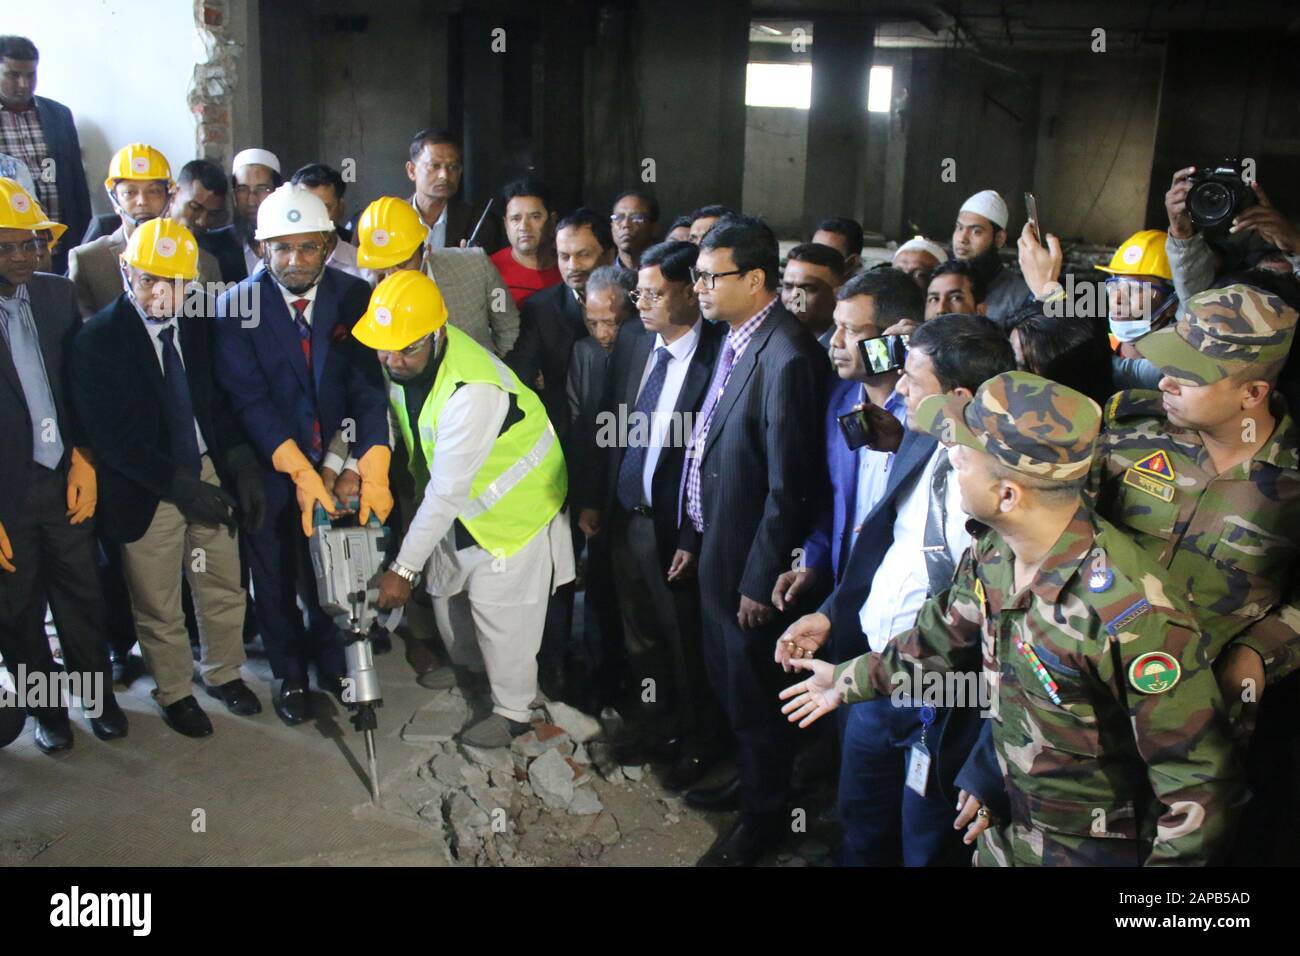 (200122) -- DHAKA, Jan. 22, 2020 (Xinhua) -- Bangladeshi Public Works and Housing Minister SM Rezaul Karim (3rd L, front) inaugurates the demolition activities of the 'illegally constructed' 16-storey headquarters building of BGMEA (Bangladesh Garment Manufacturers and Exporters Association) in Dhaka, Bangladesh on Jan. 22, 2020. TO GO WITH 'Roundup: Bangladesh demolishes apparel exporters' headquarters building in Dhaka' (Str/Xinhua) Stock Photo